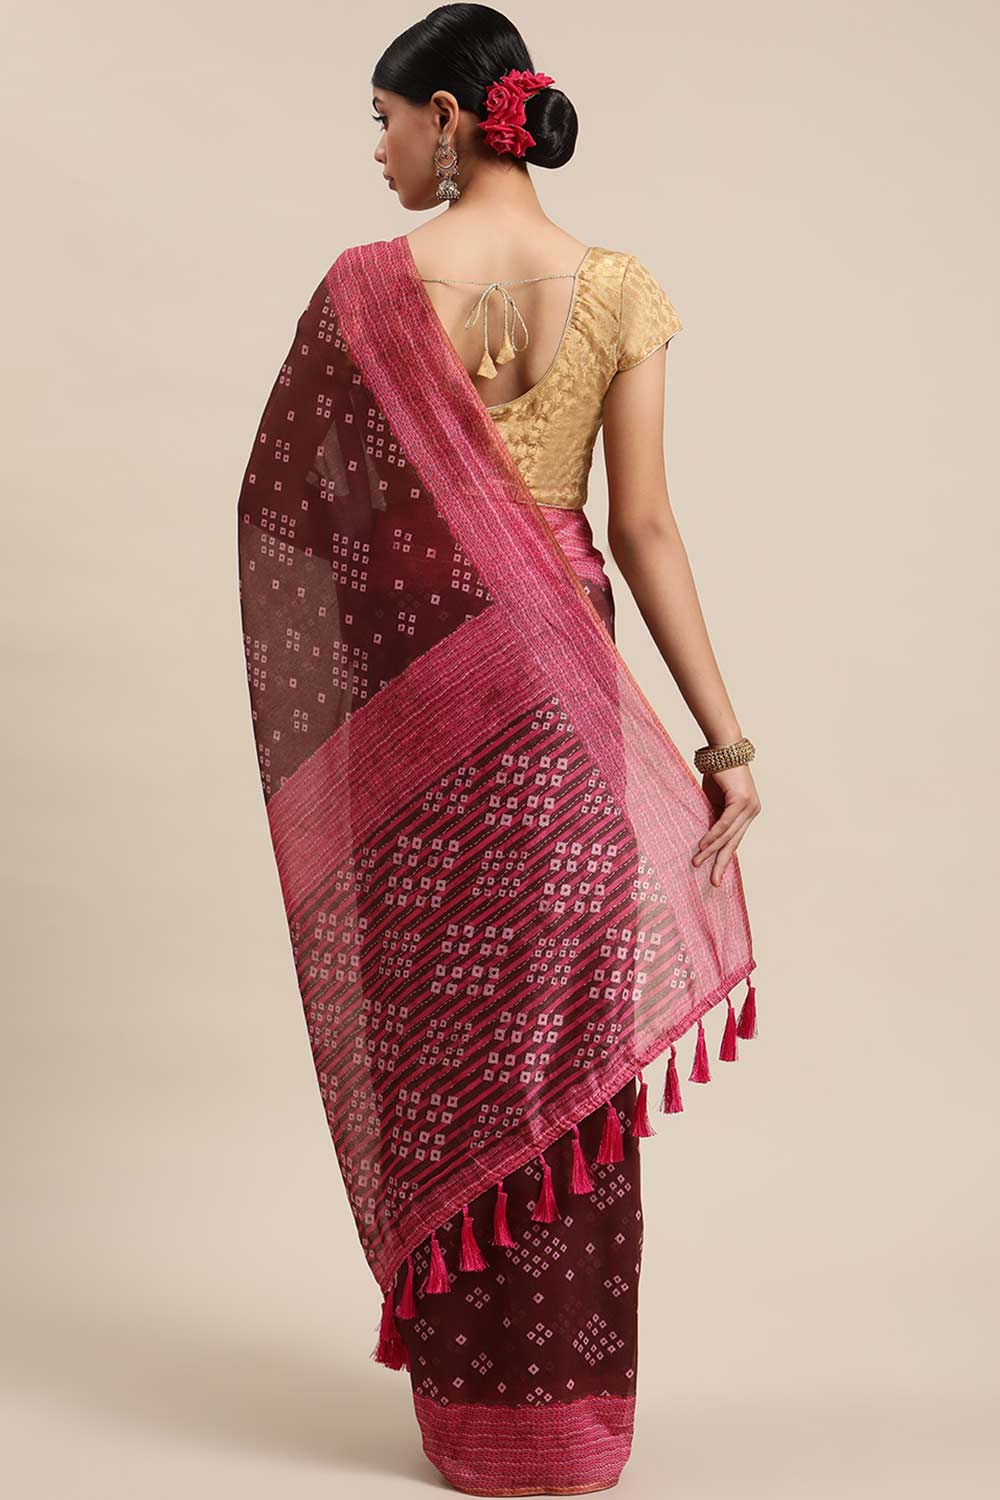 Shop Hema Pink Poly Cotton Bandhani Printed One Minute Saree at best offer at our  Store - One Minute Saree